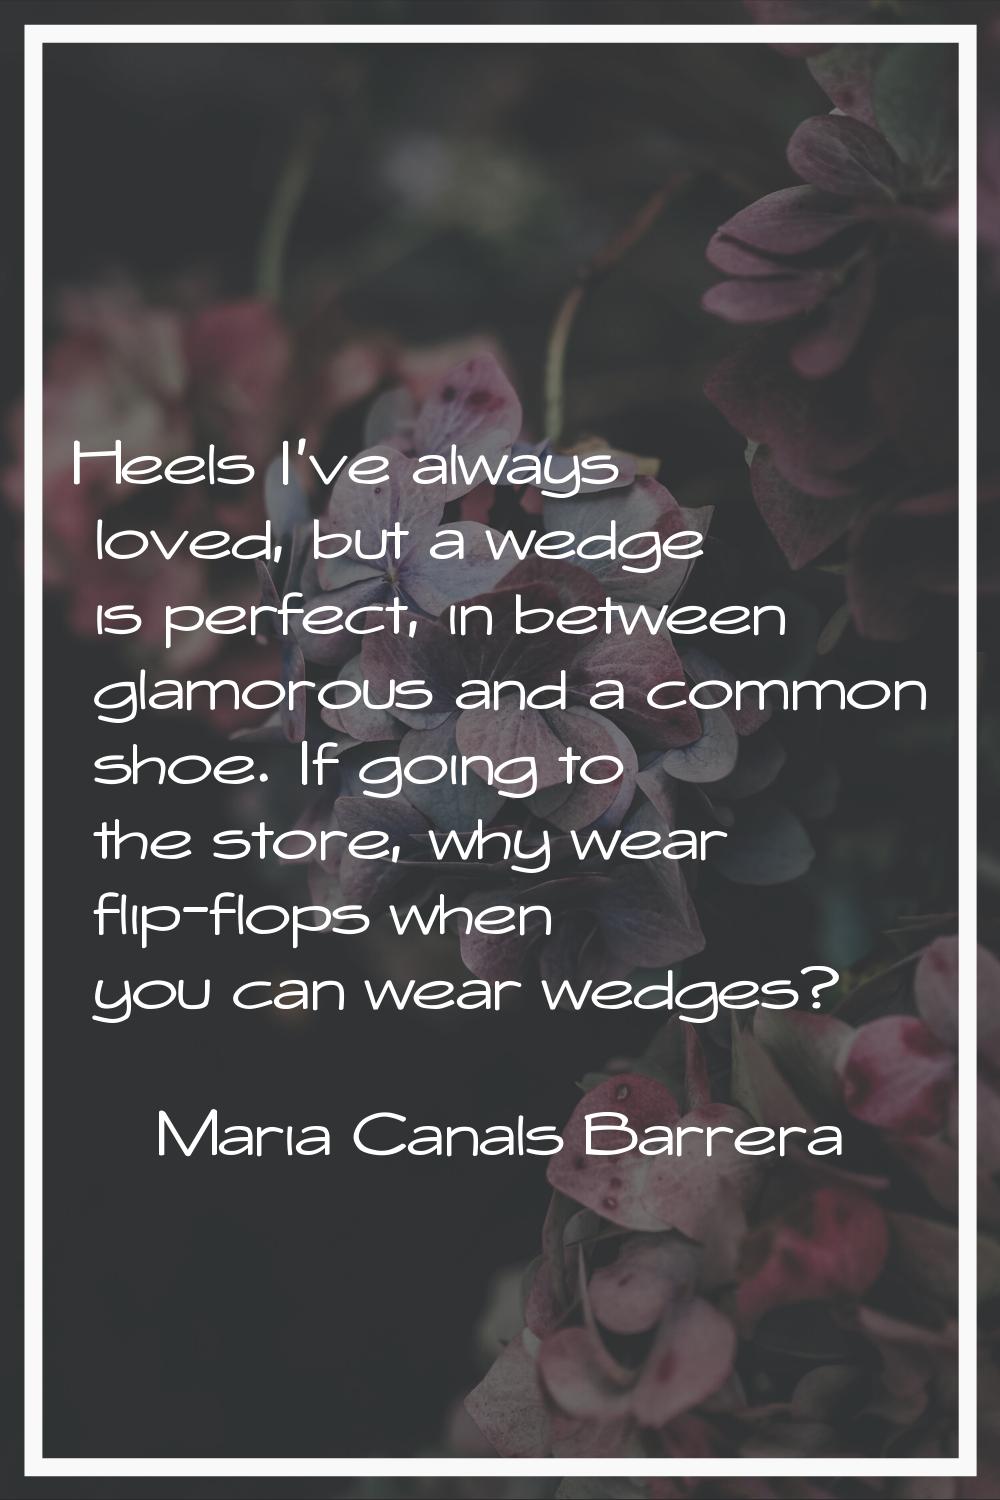 Heels I've always loved, but a wedge is perfect, in between glamorous and a common shoe. If going t